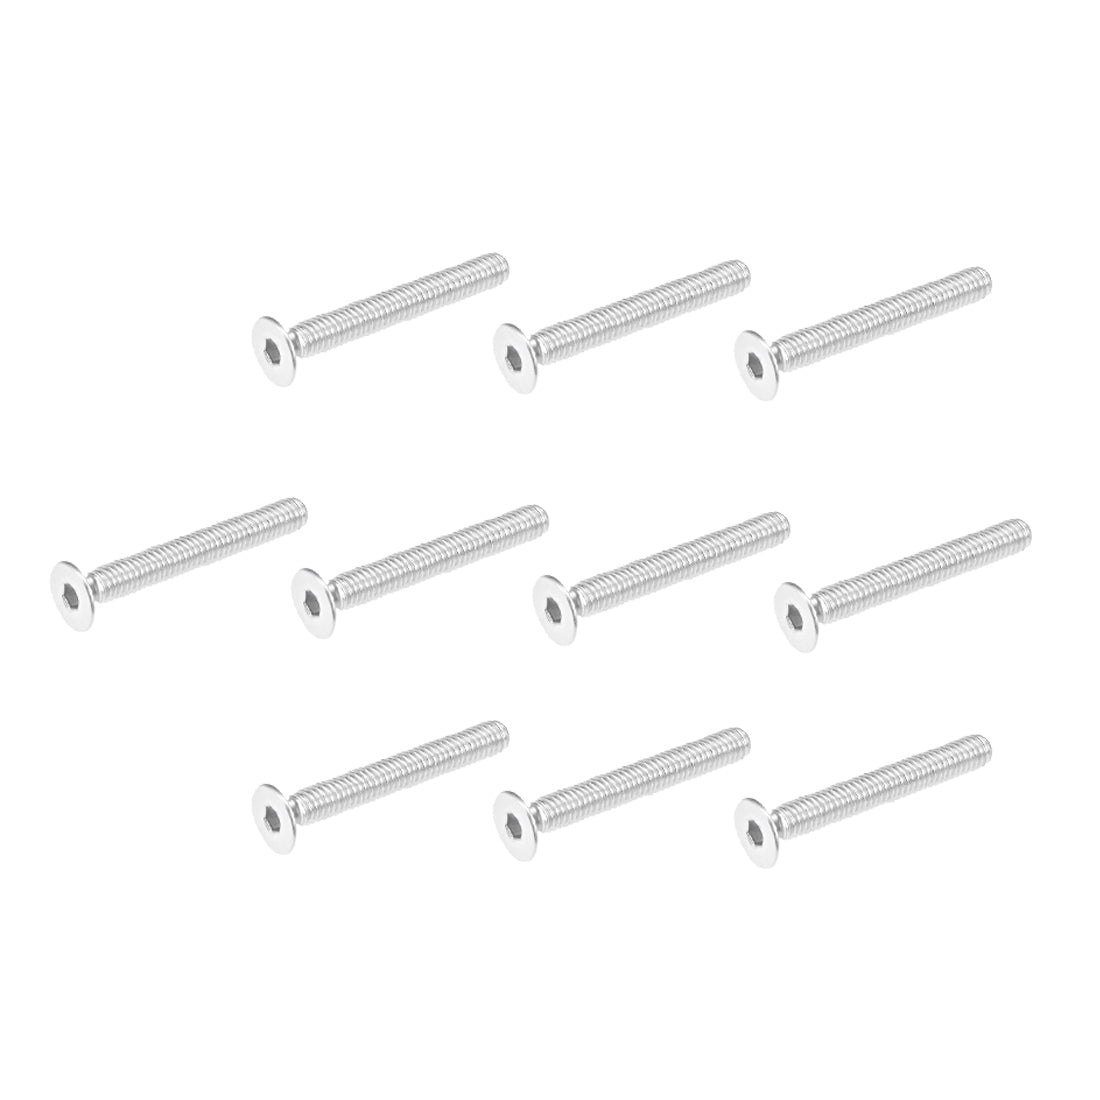 uxcell Uxcell Flat Head Machine Screws Inner Hex 304 Stainless Steel Fasteners Bolts 40pcs